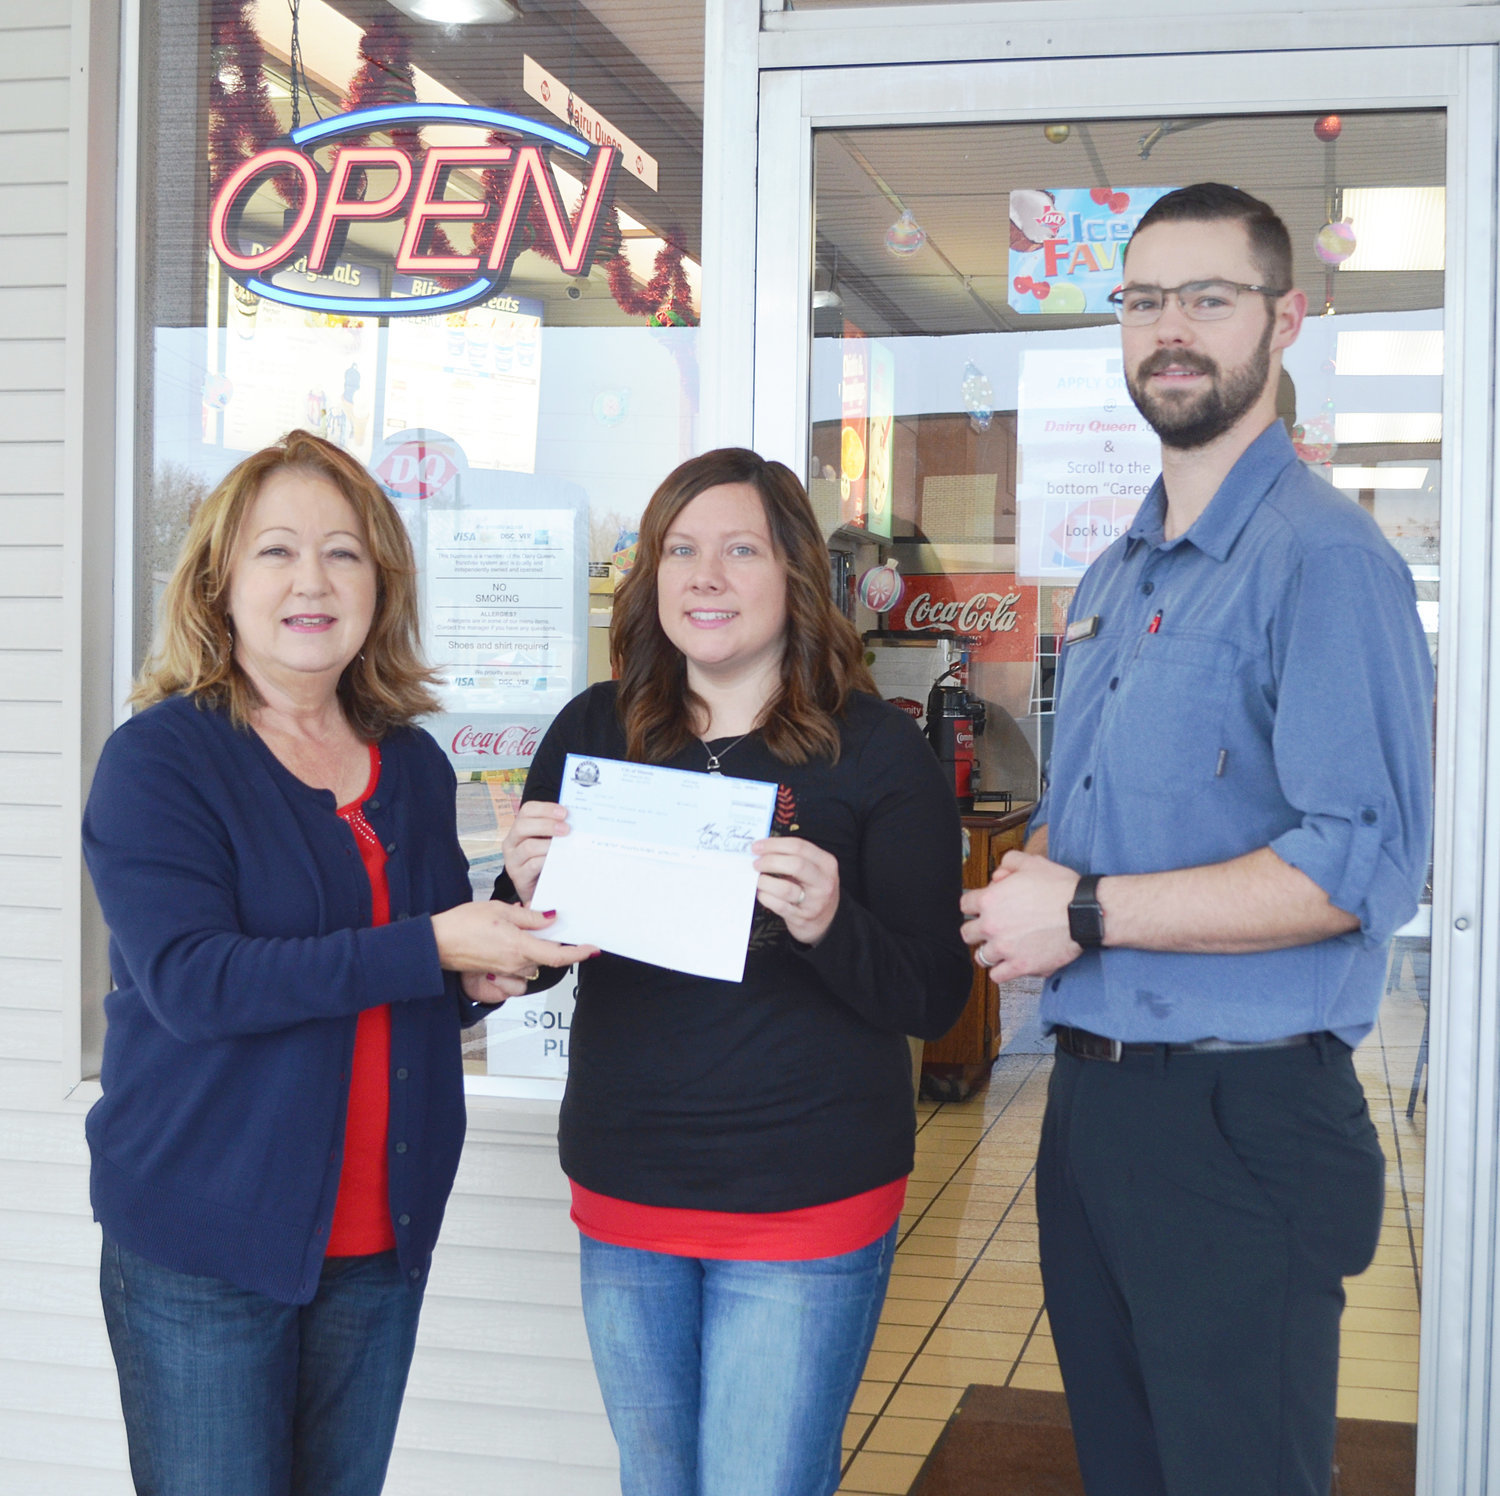 Rebecca Bohannan, center, was the winner of $500 from the Shop Local Mineola campaign. While shopping in downtown Mineola, she visited Dairy Queen and her receipt was the first one drawn as part of this year’s contest. Also pictured is Doris Newman, director of the Mineola Main Street program, and Dairy Queen owner Daniel Tucker. The campaign covers purchases made between Nov. 23 and Dec. 28.